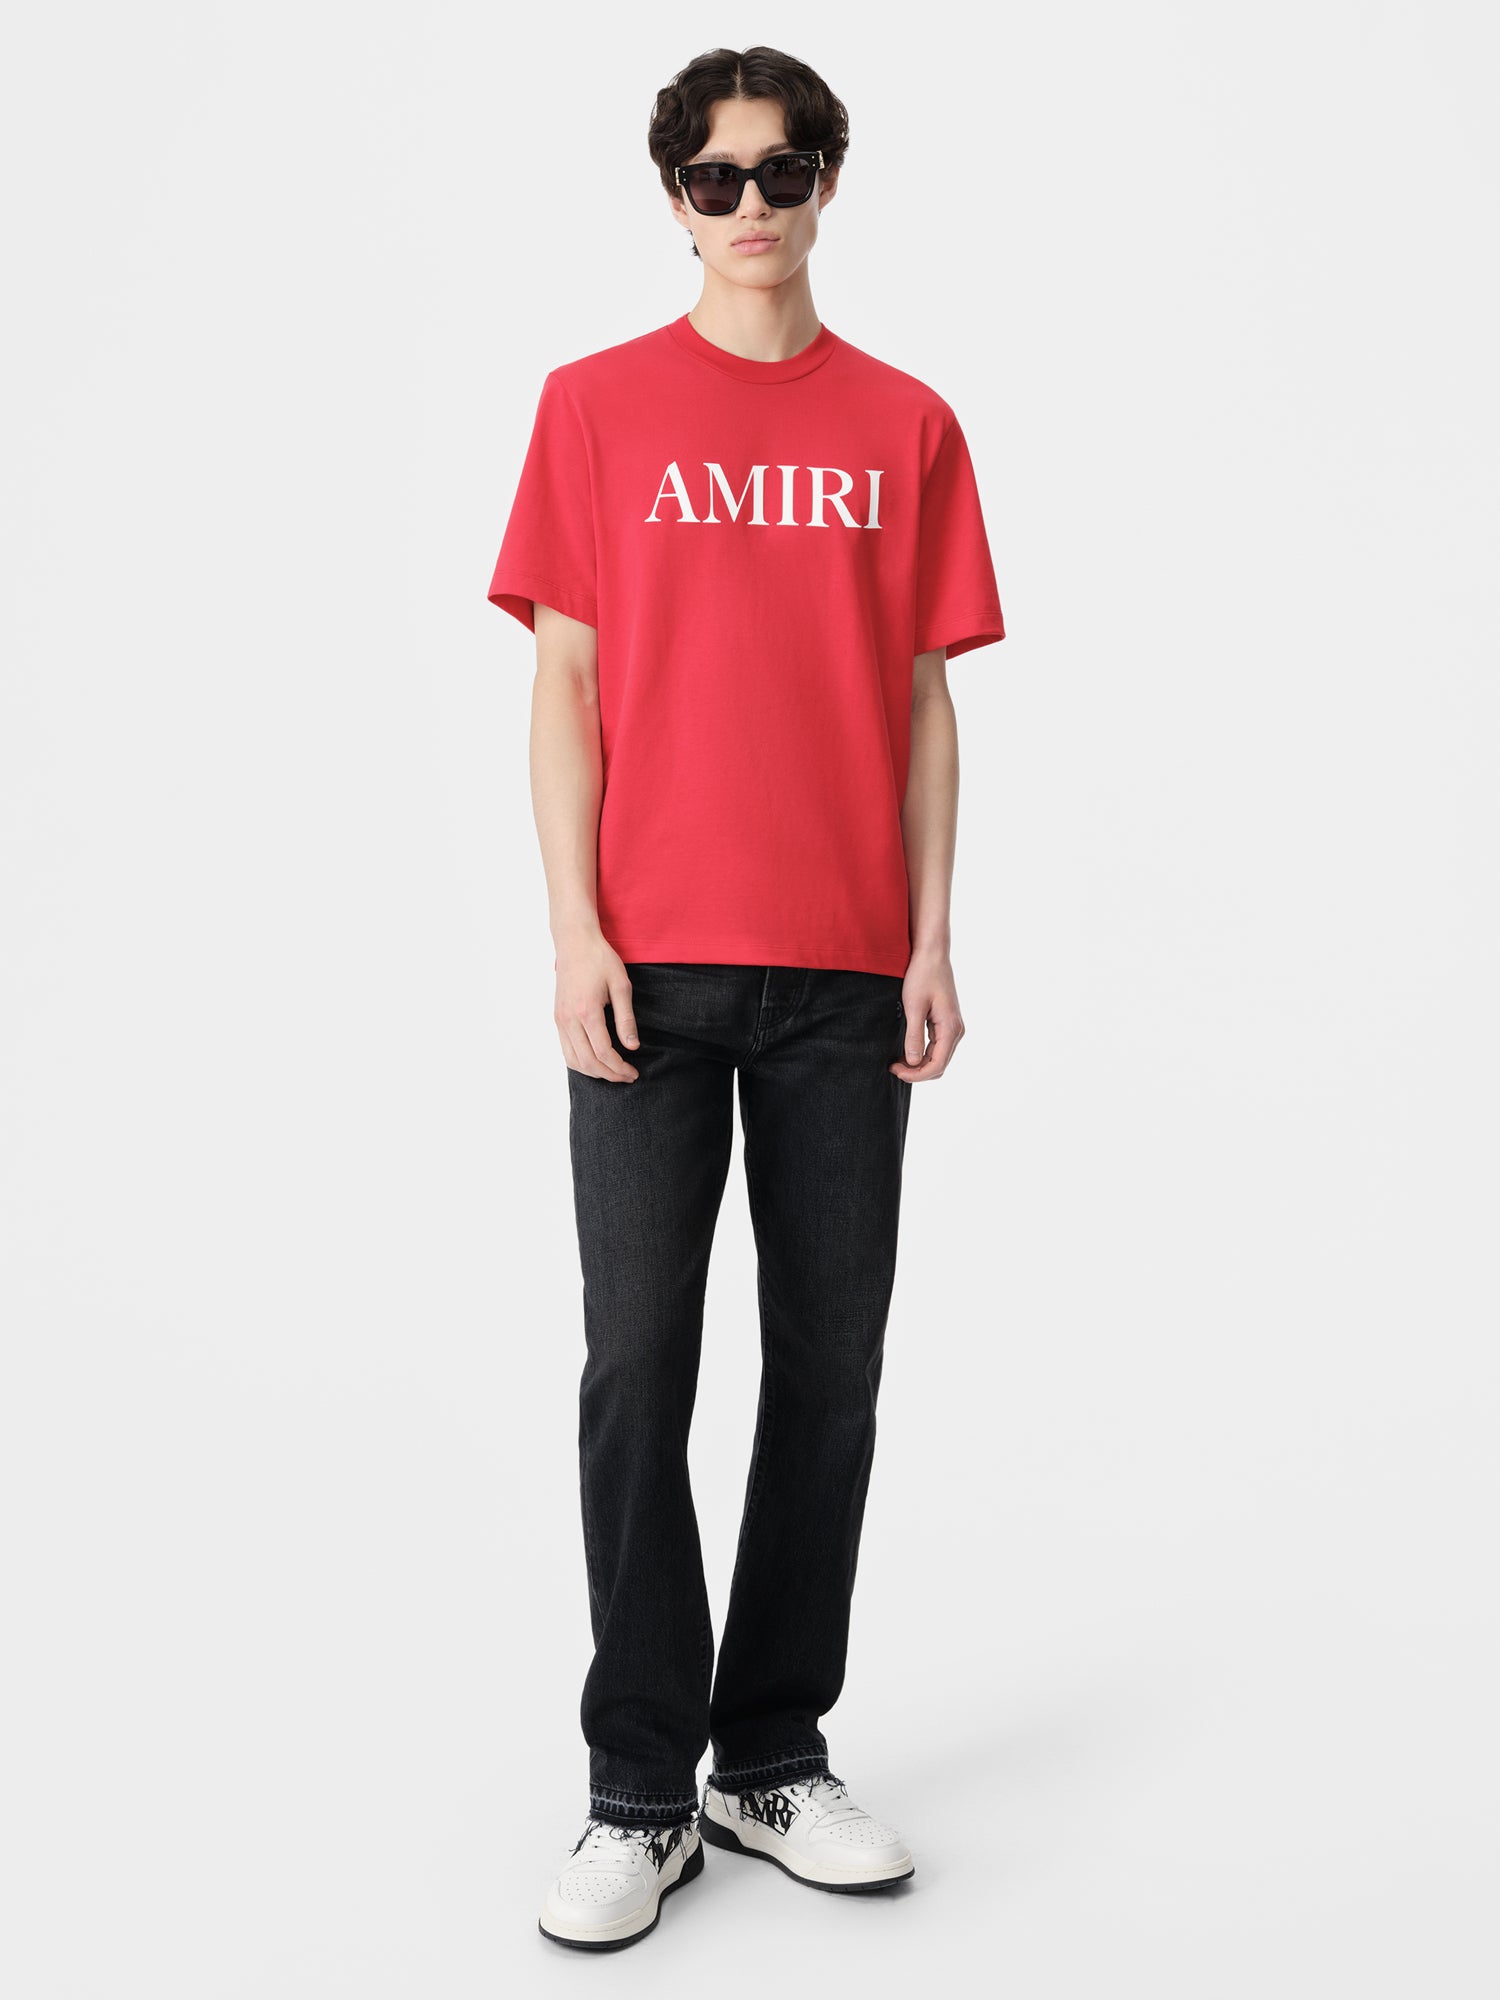 Product AMIRI CORE LOGO TEE - Red featured image